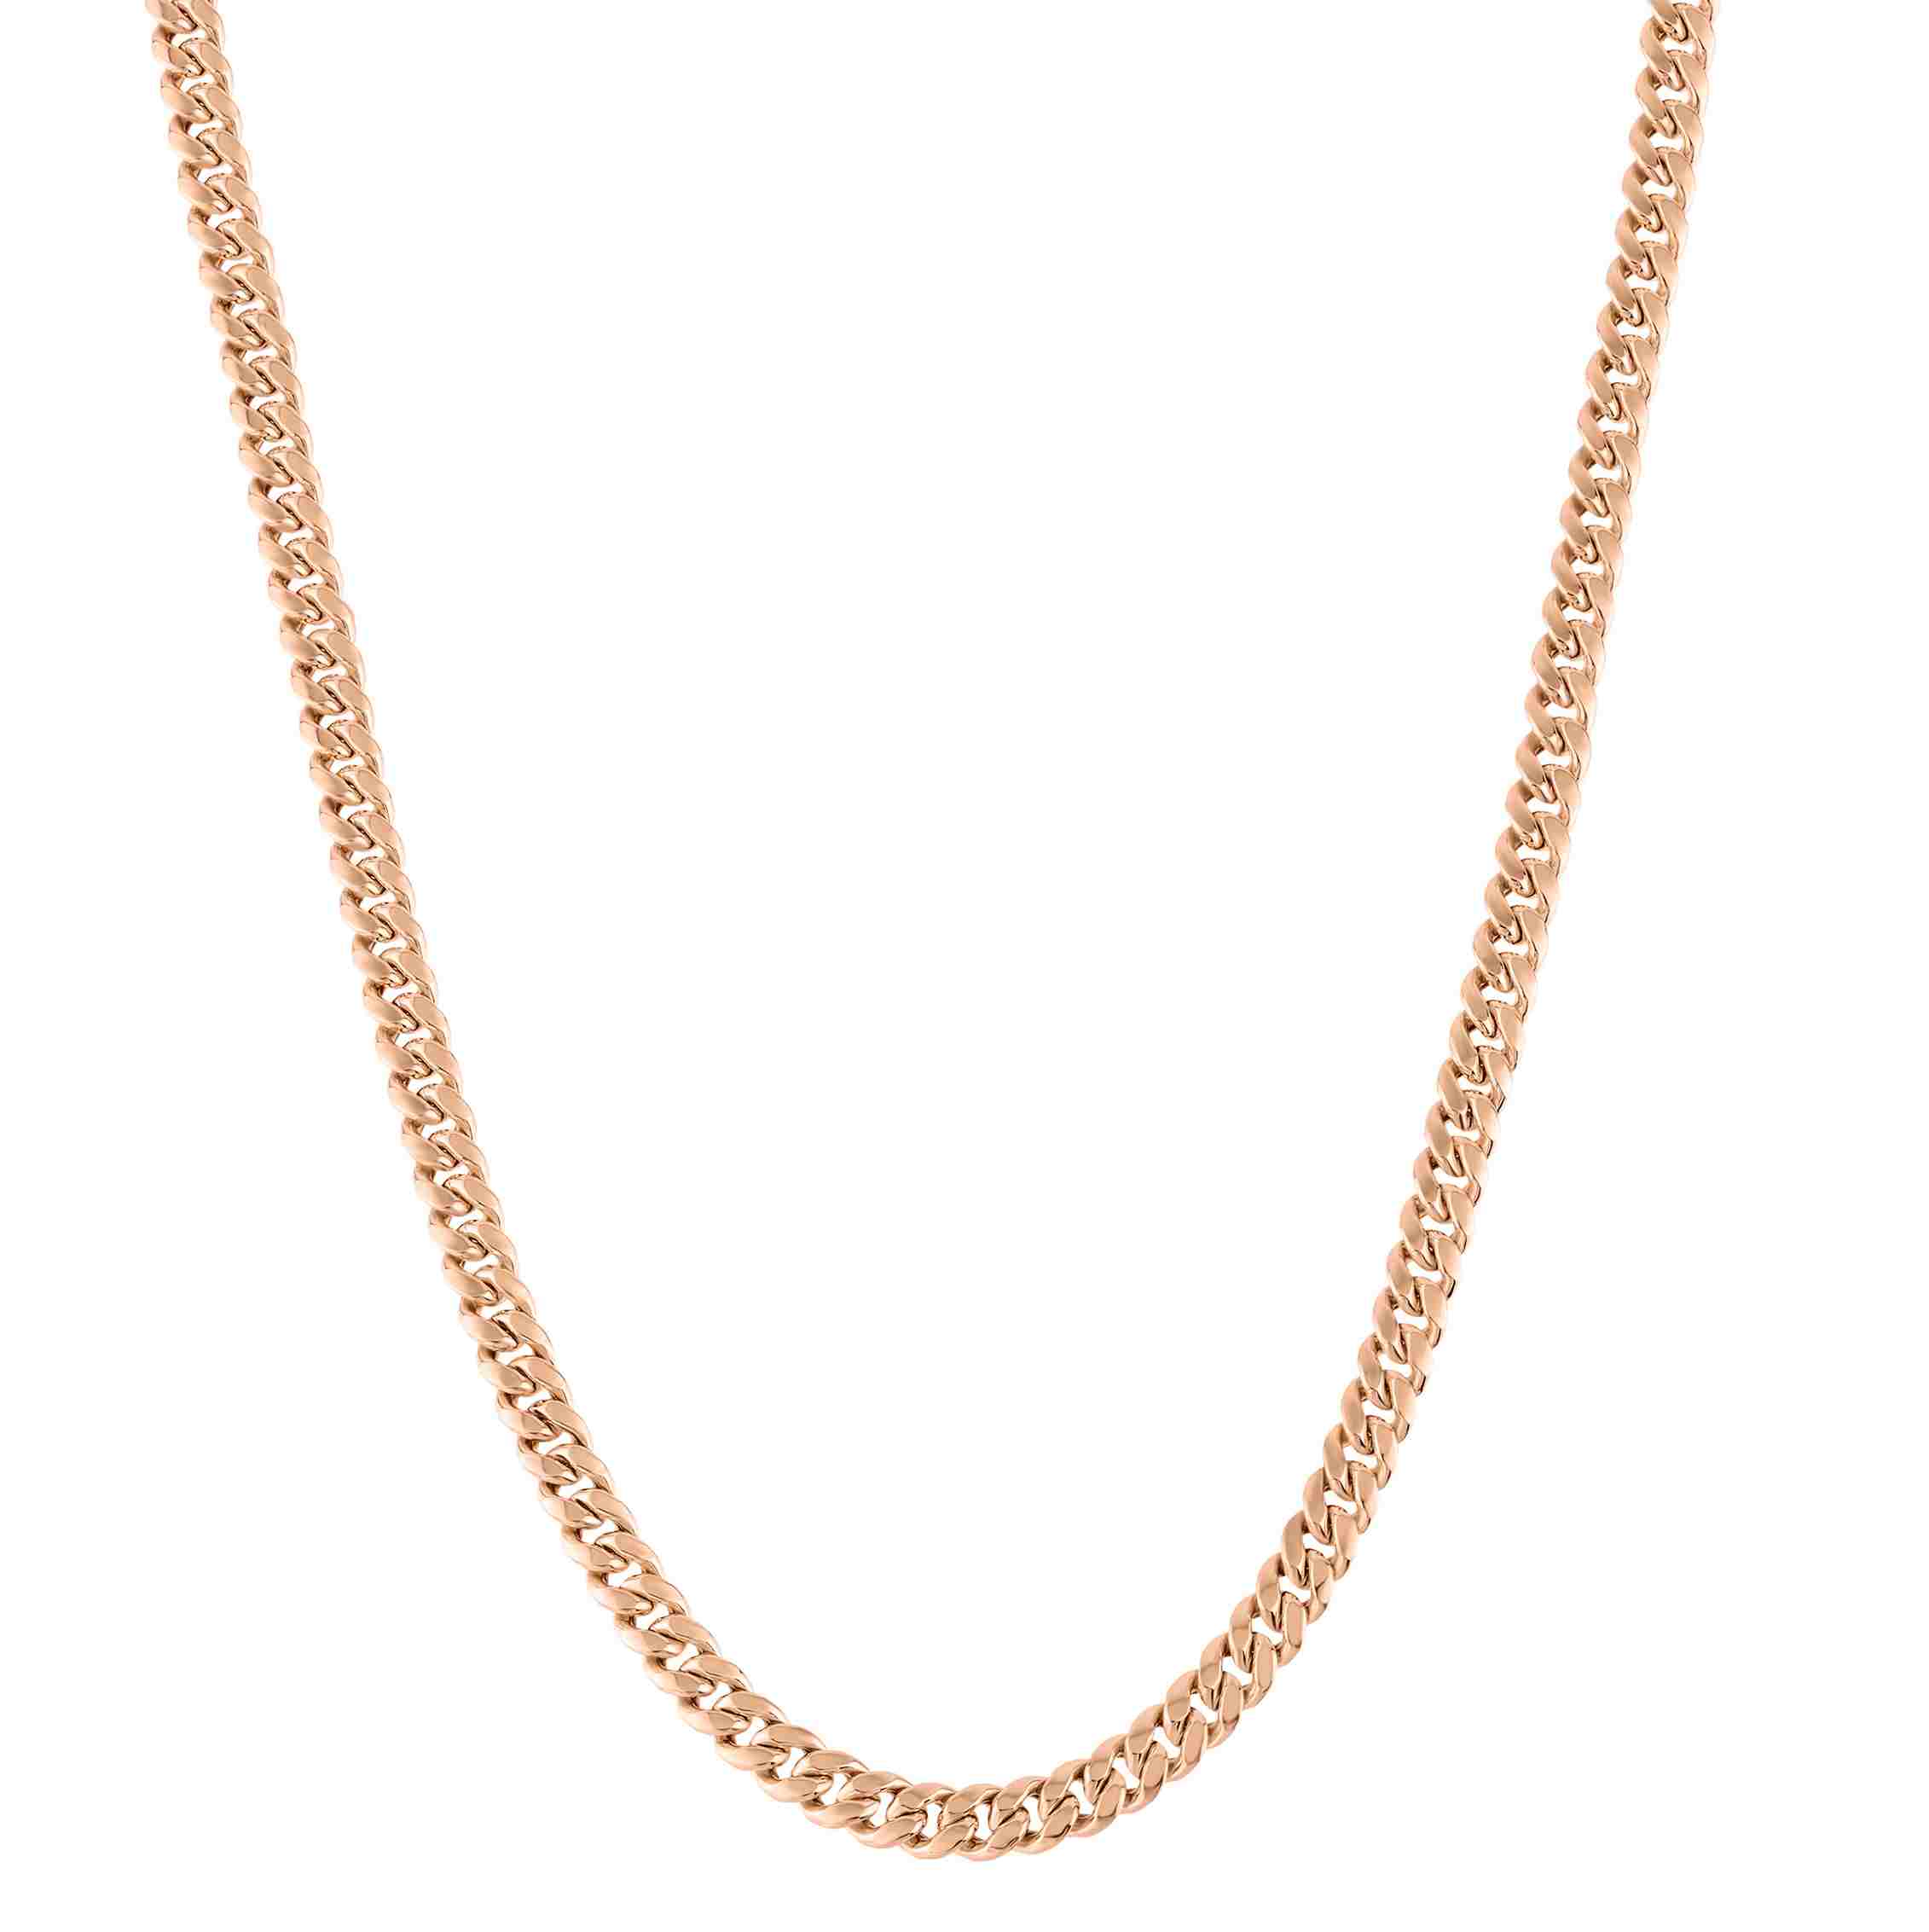 Women's Cuban Link Chains | Real Gold Jewelry | Bayam Jewelry